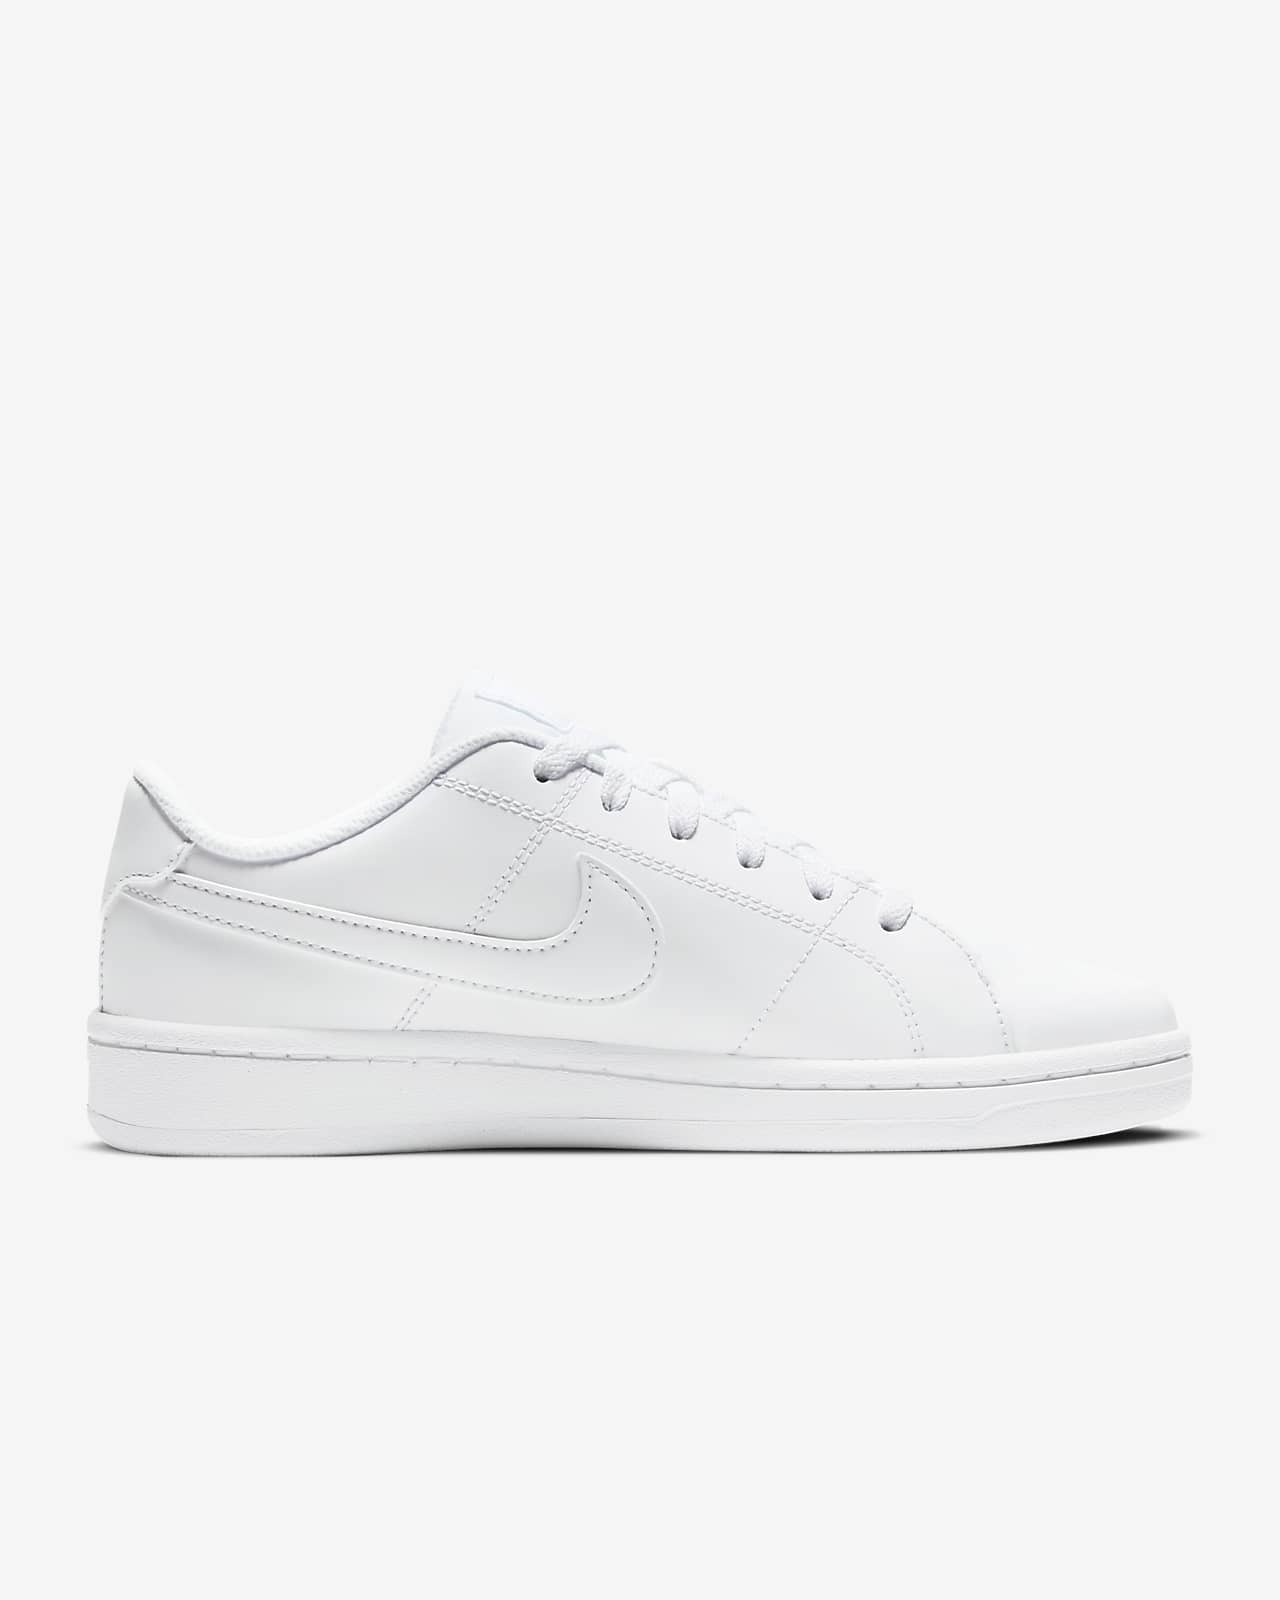 Chaussure Nike Court Royale 2 pour 